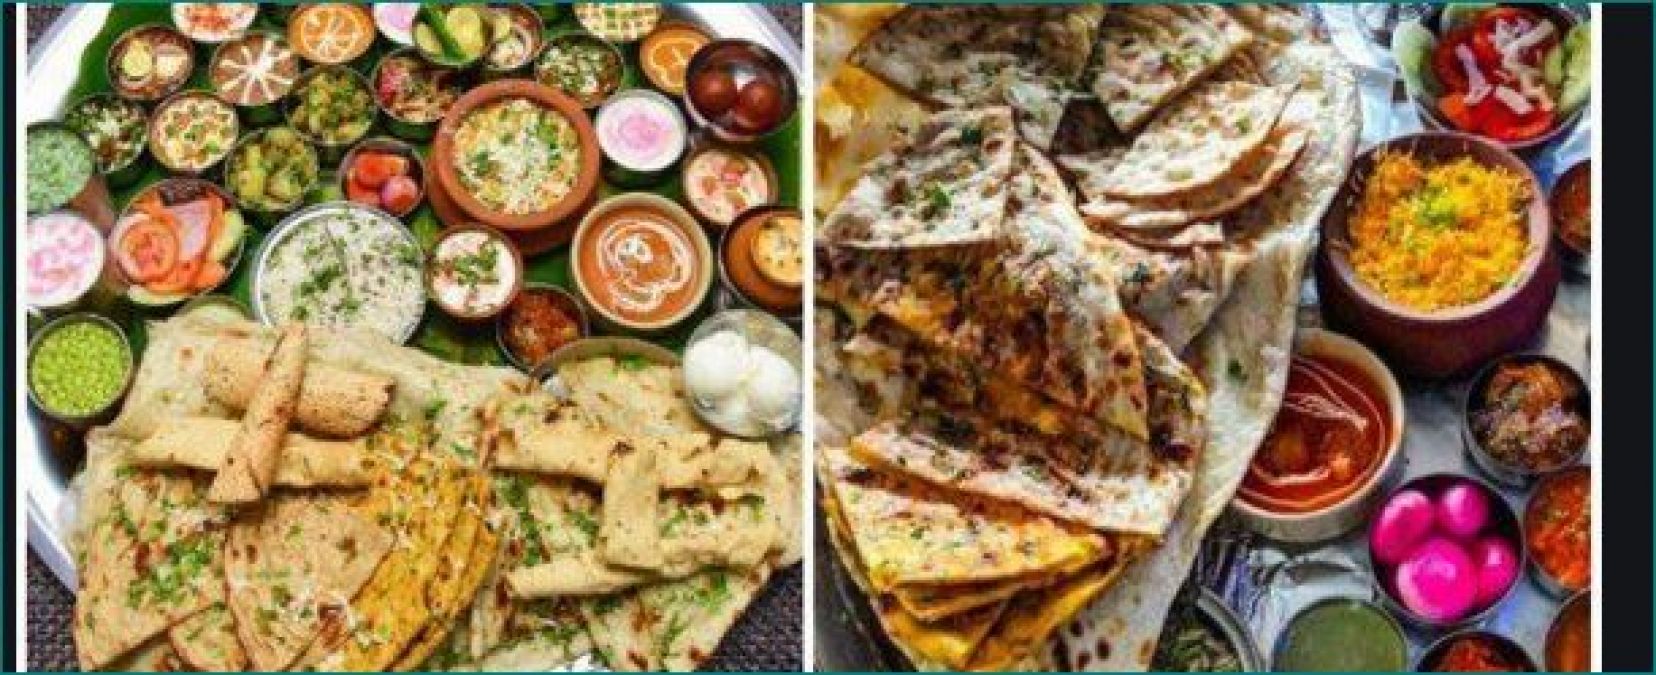 You can earn Rs. 2 lakh by consuming this 'Veg Thali'